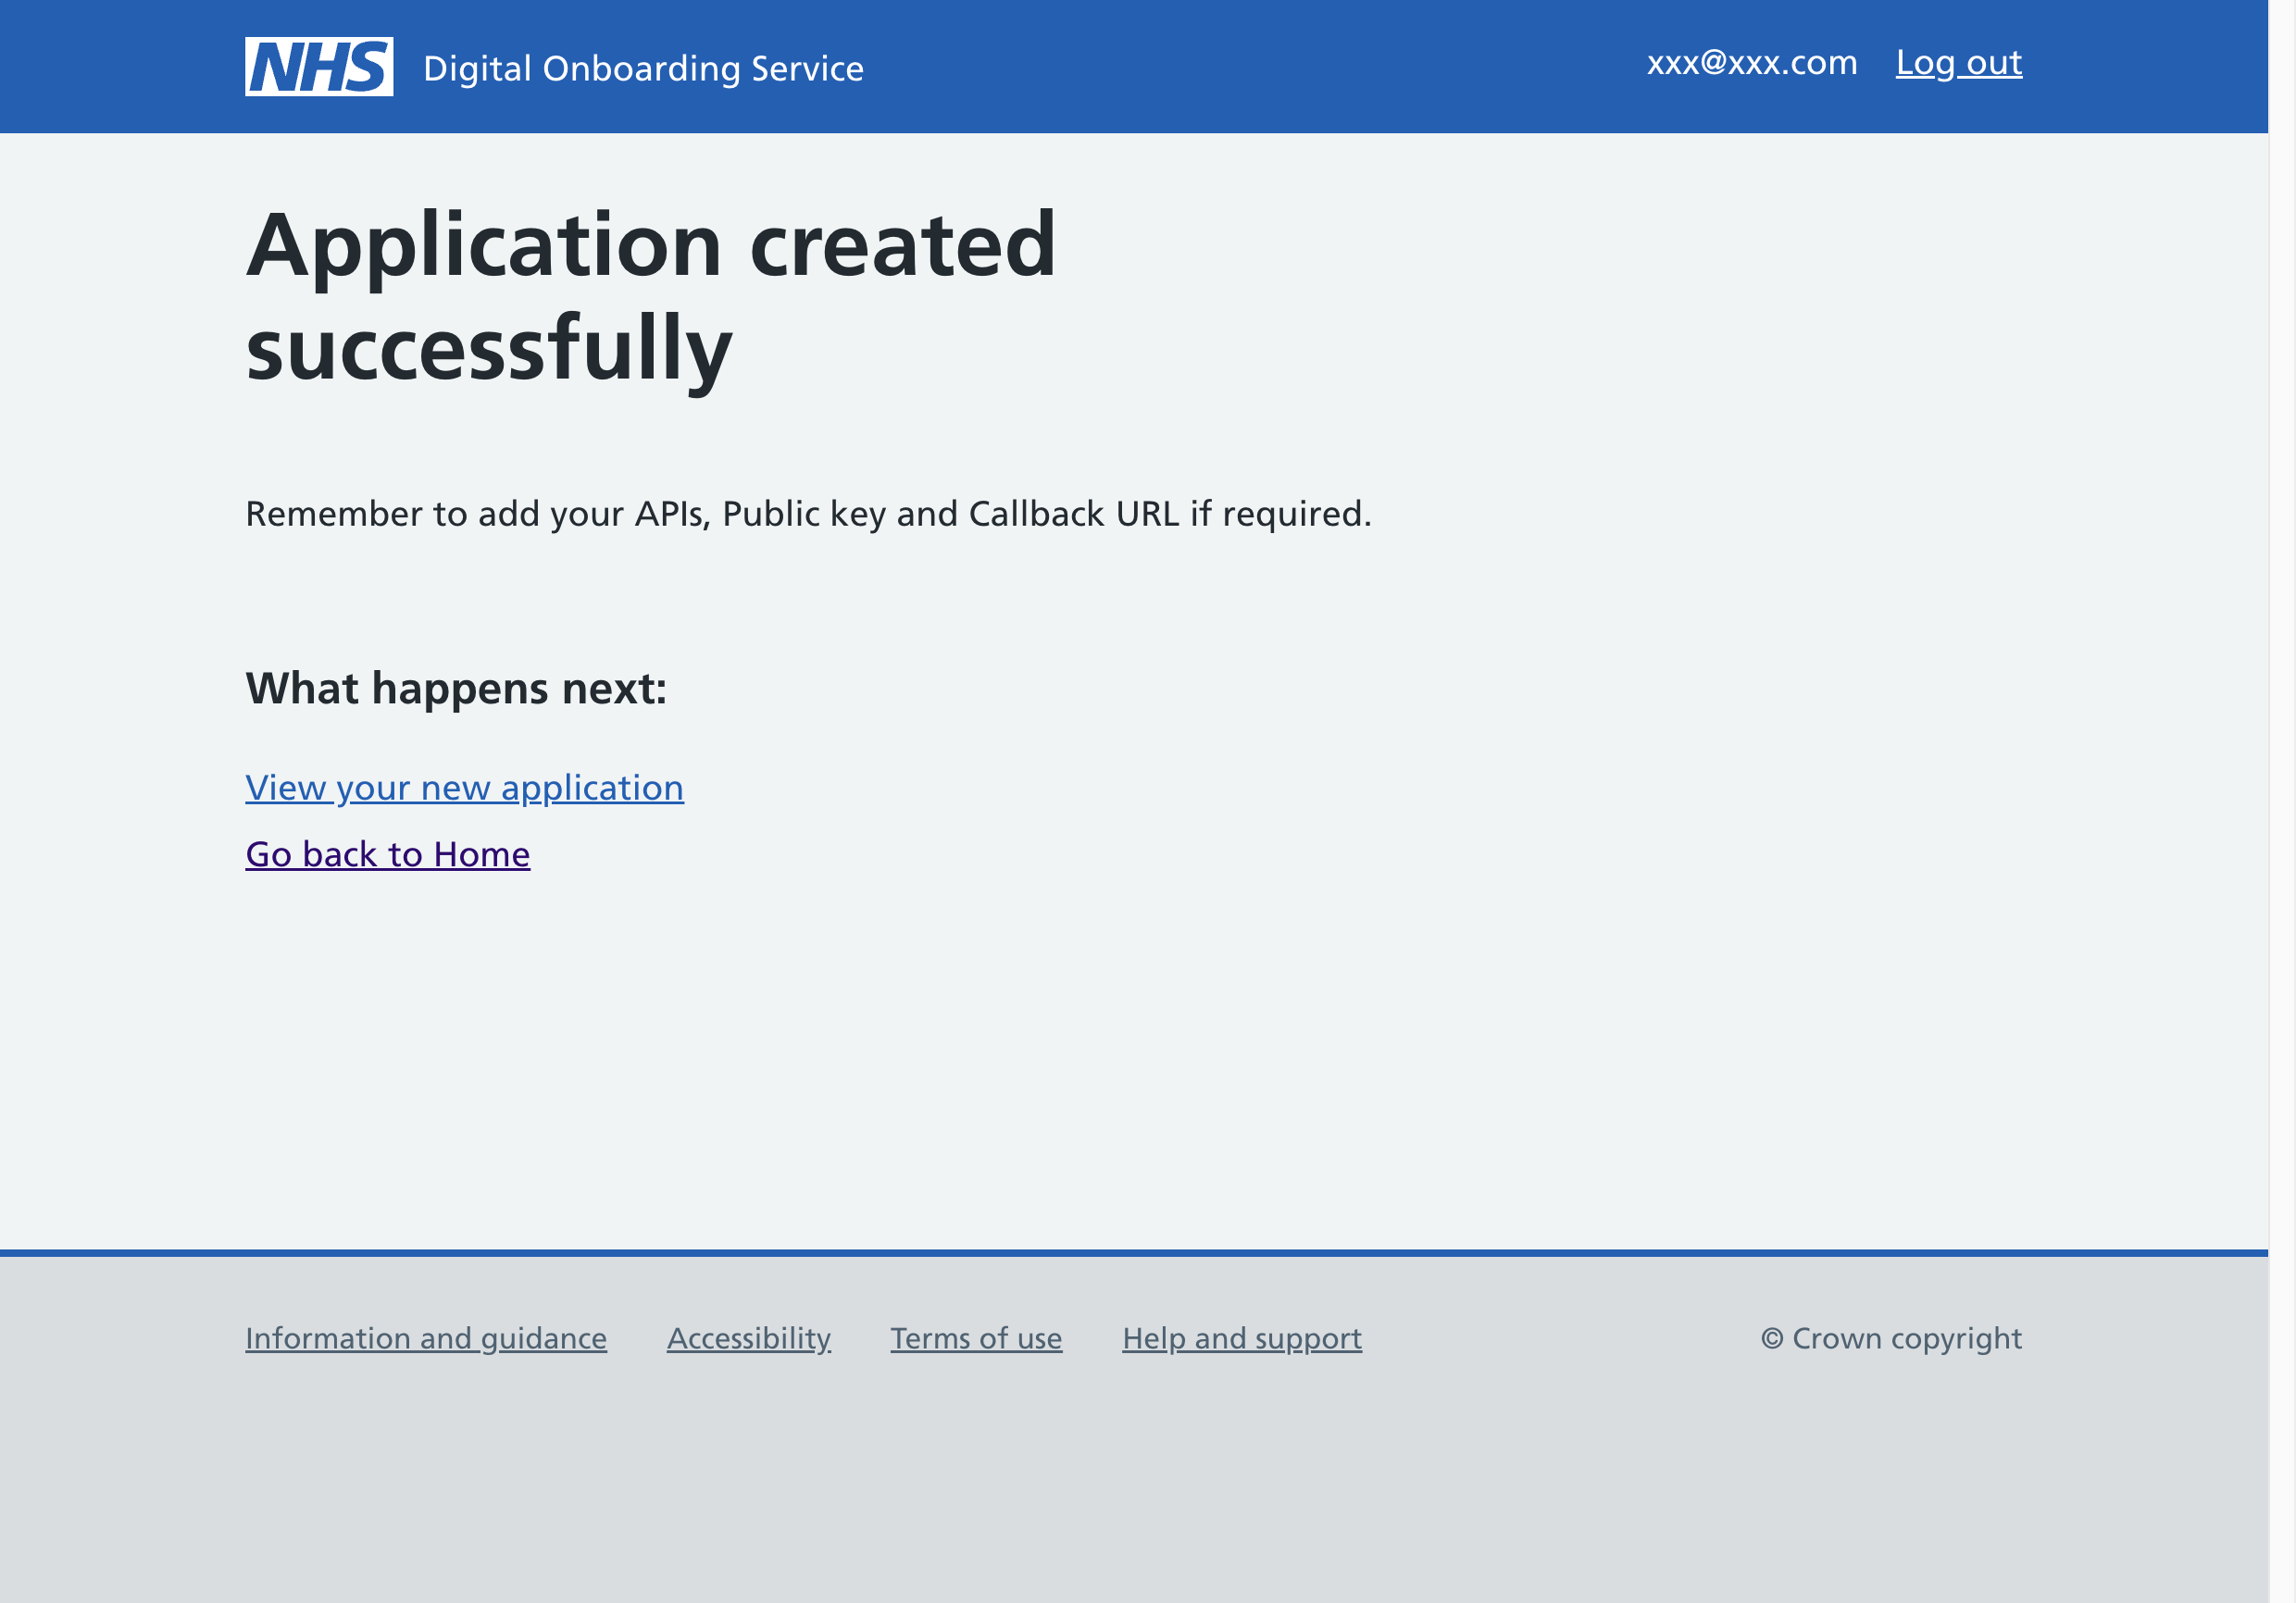 A screenshot of the 'Application created successfully' page